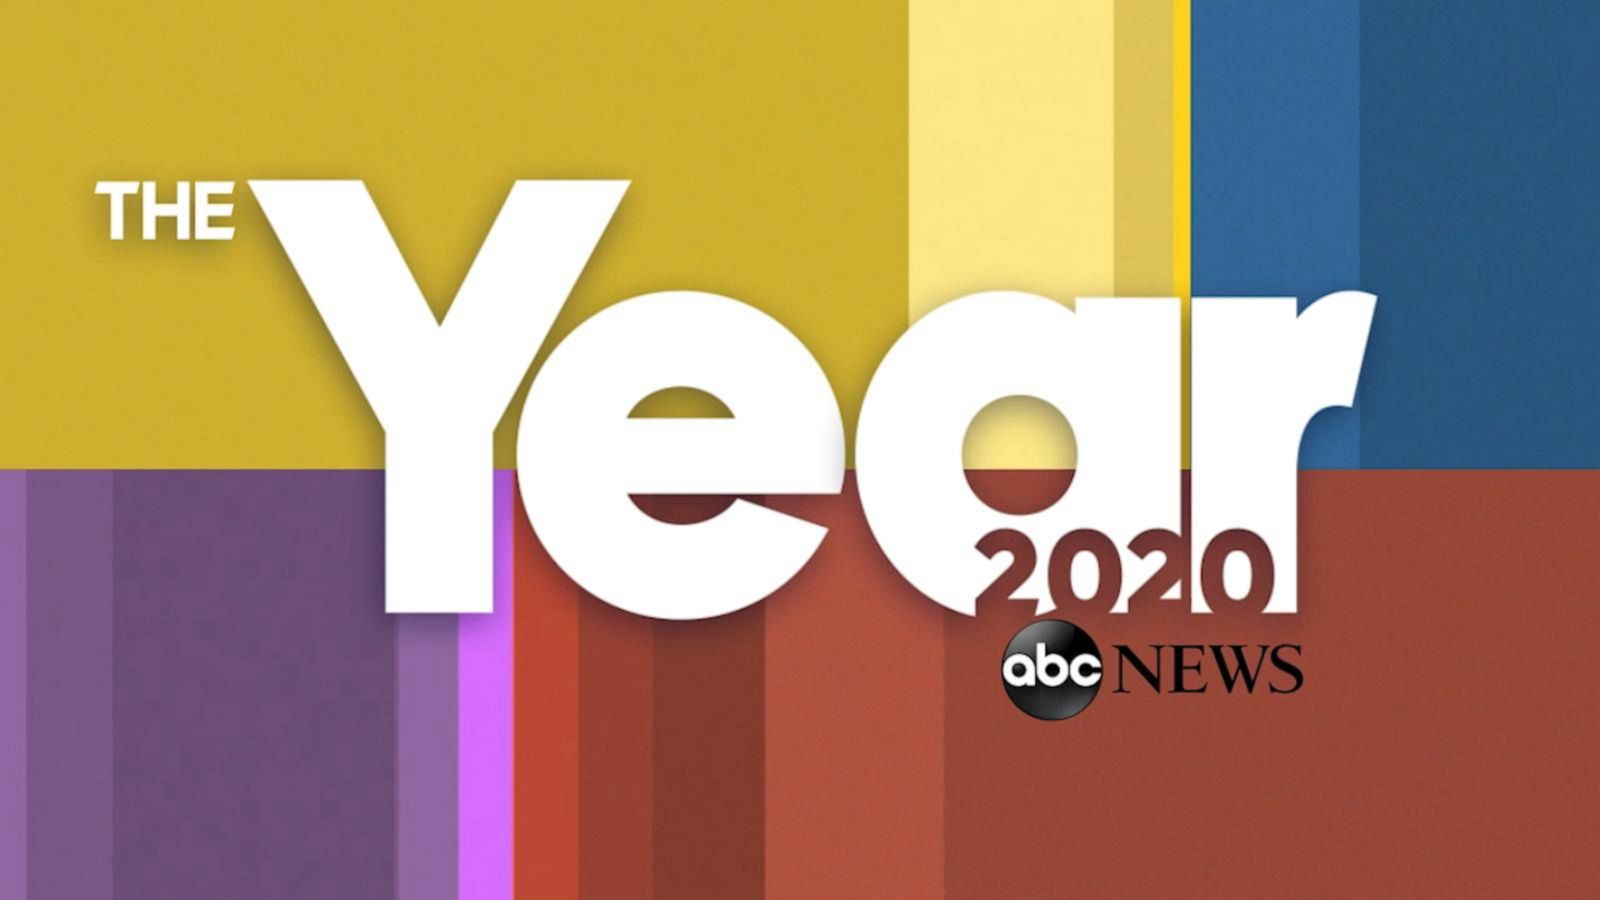 ‘The Year’ with Robin Roberts Tuesday, Dec. 29th at 98c on ABC